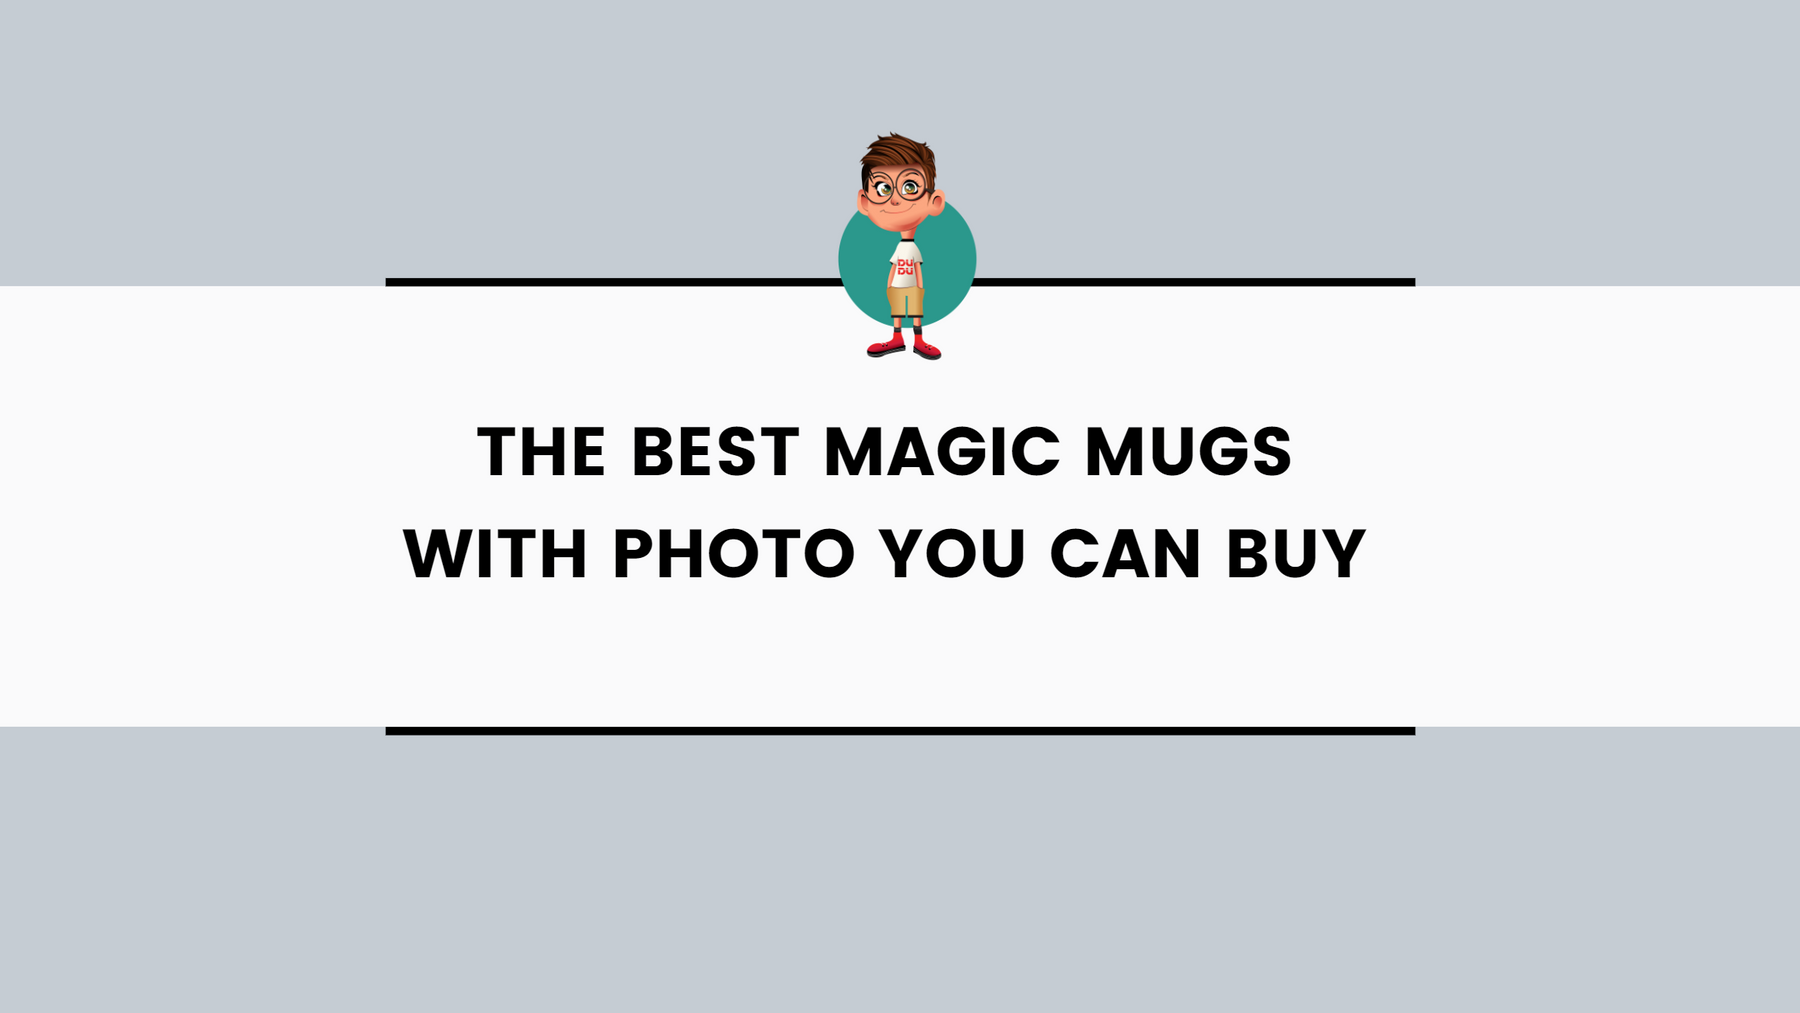 The Best Magic Mugs With Photo You Can Buy